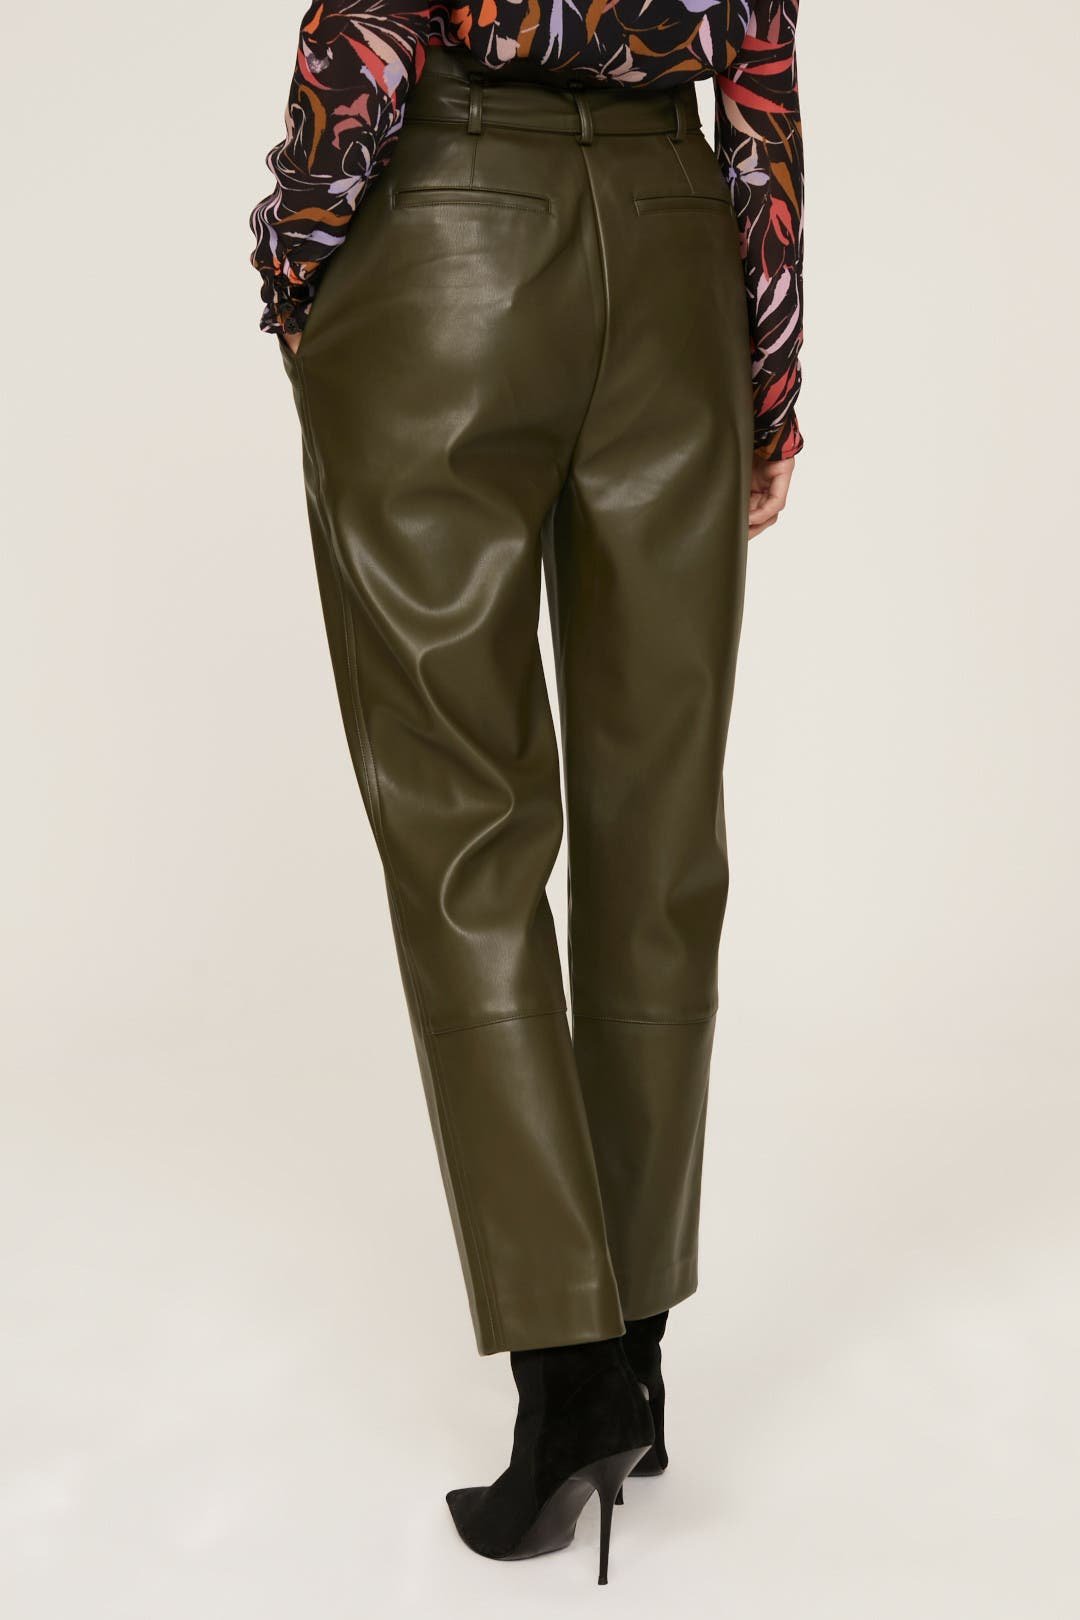 dark green leather pants rent the runway fall 2022